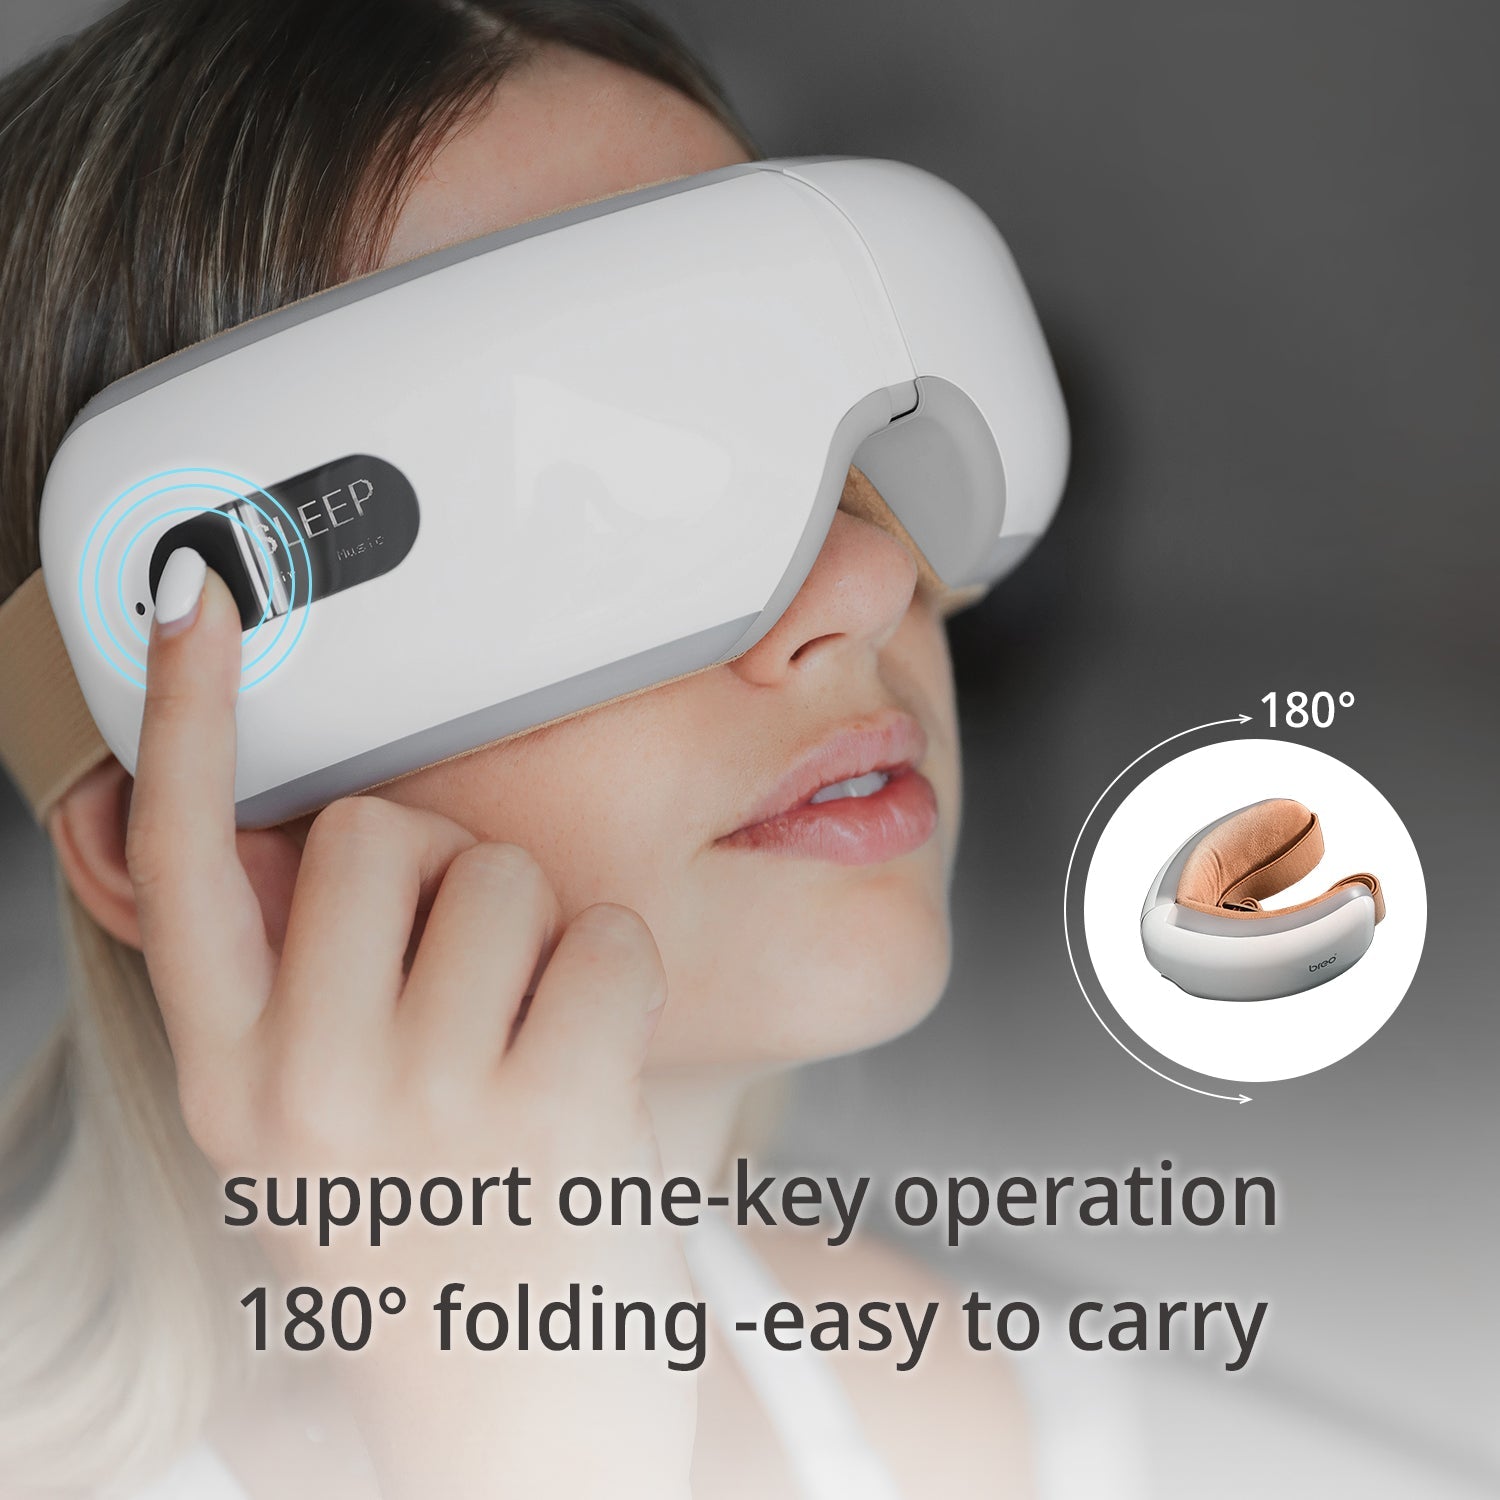 Breo iSee 4 | Eye Massager Tool - Breo® Official Website